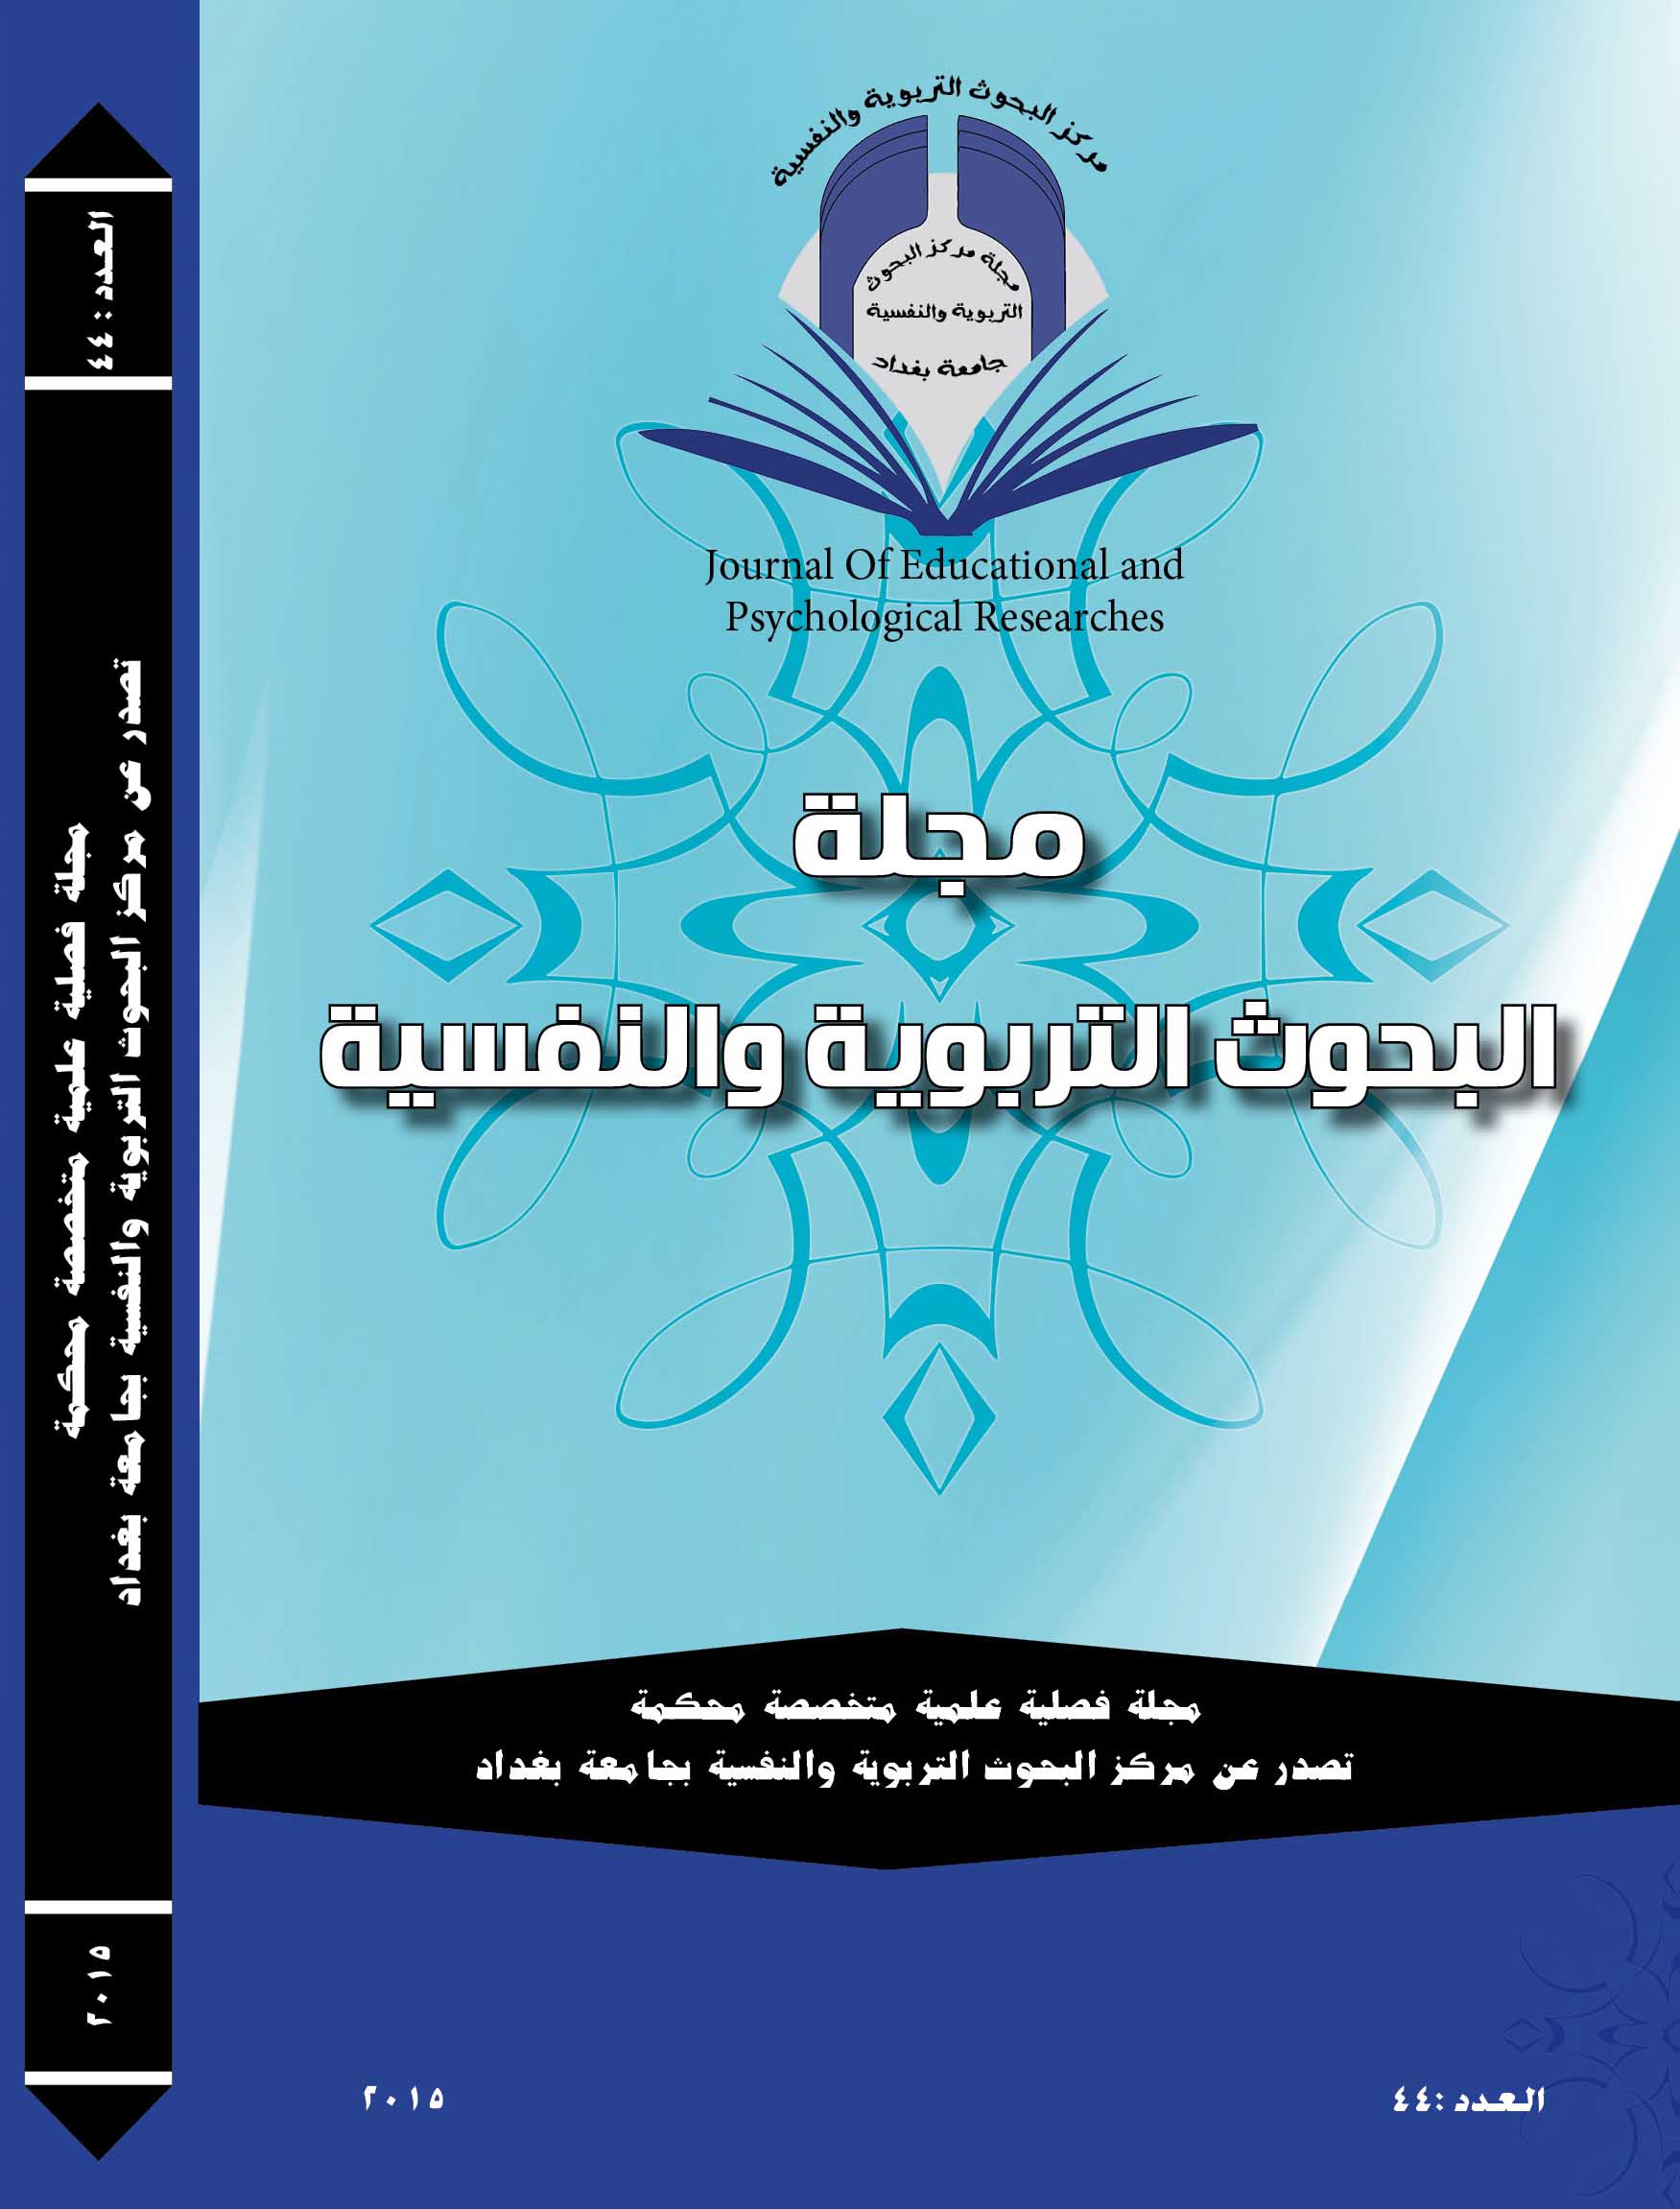 Journal Of Educational And Psychological Researches